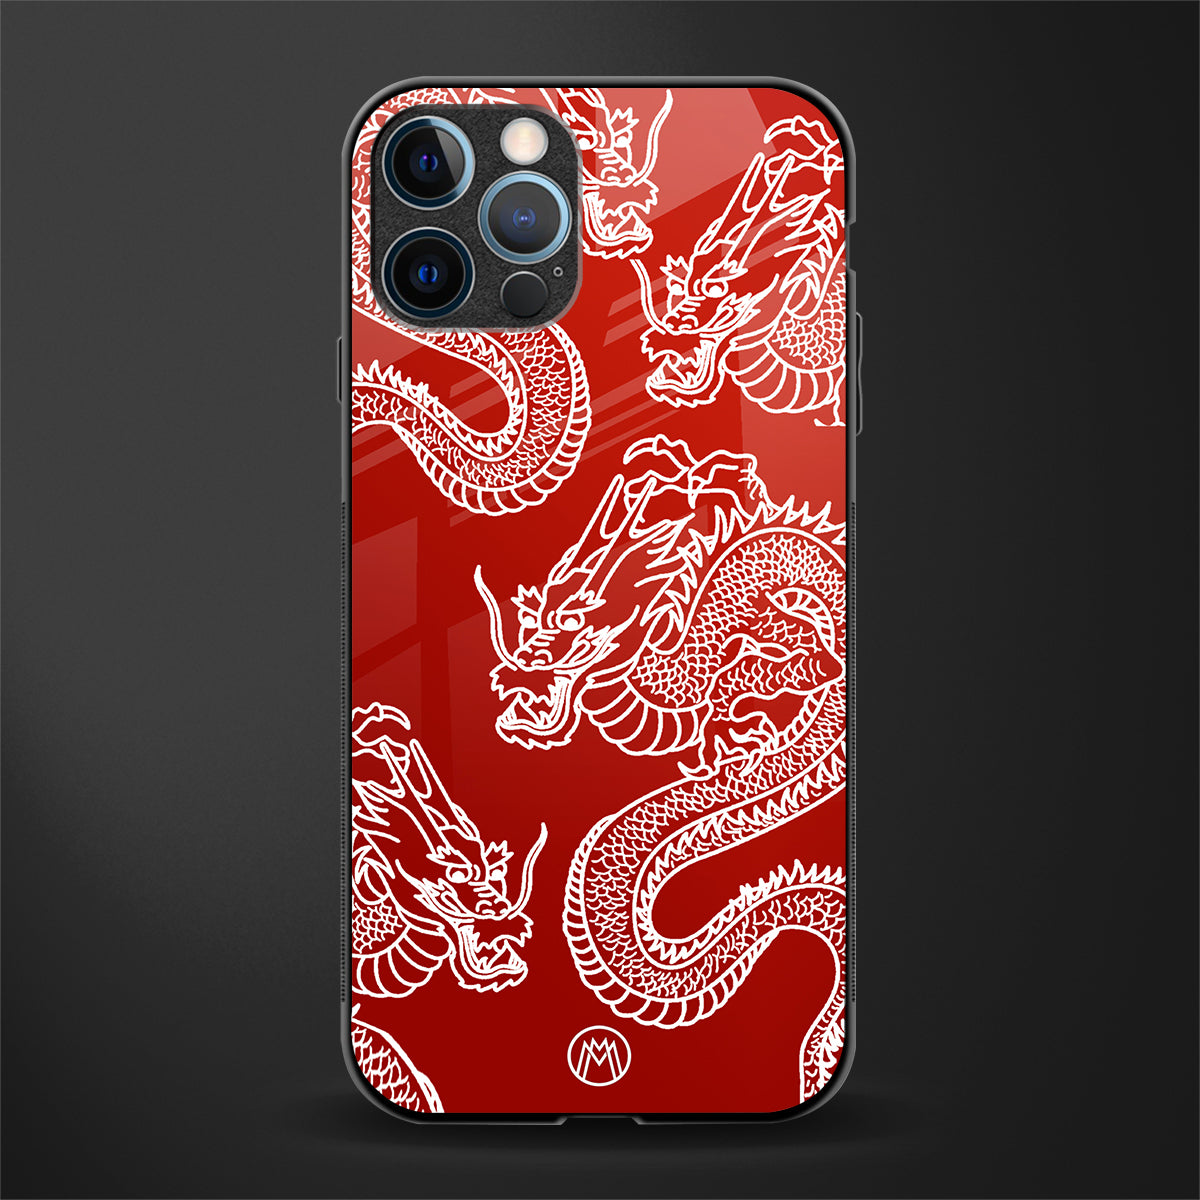 dragons red glass case for iphone 12 pro max image